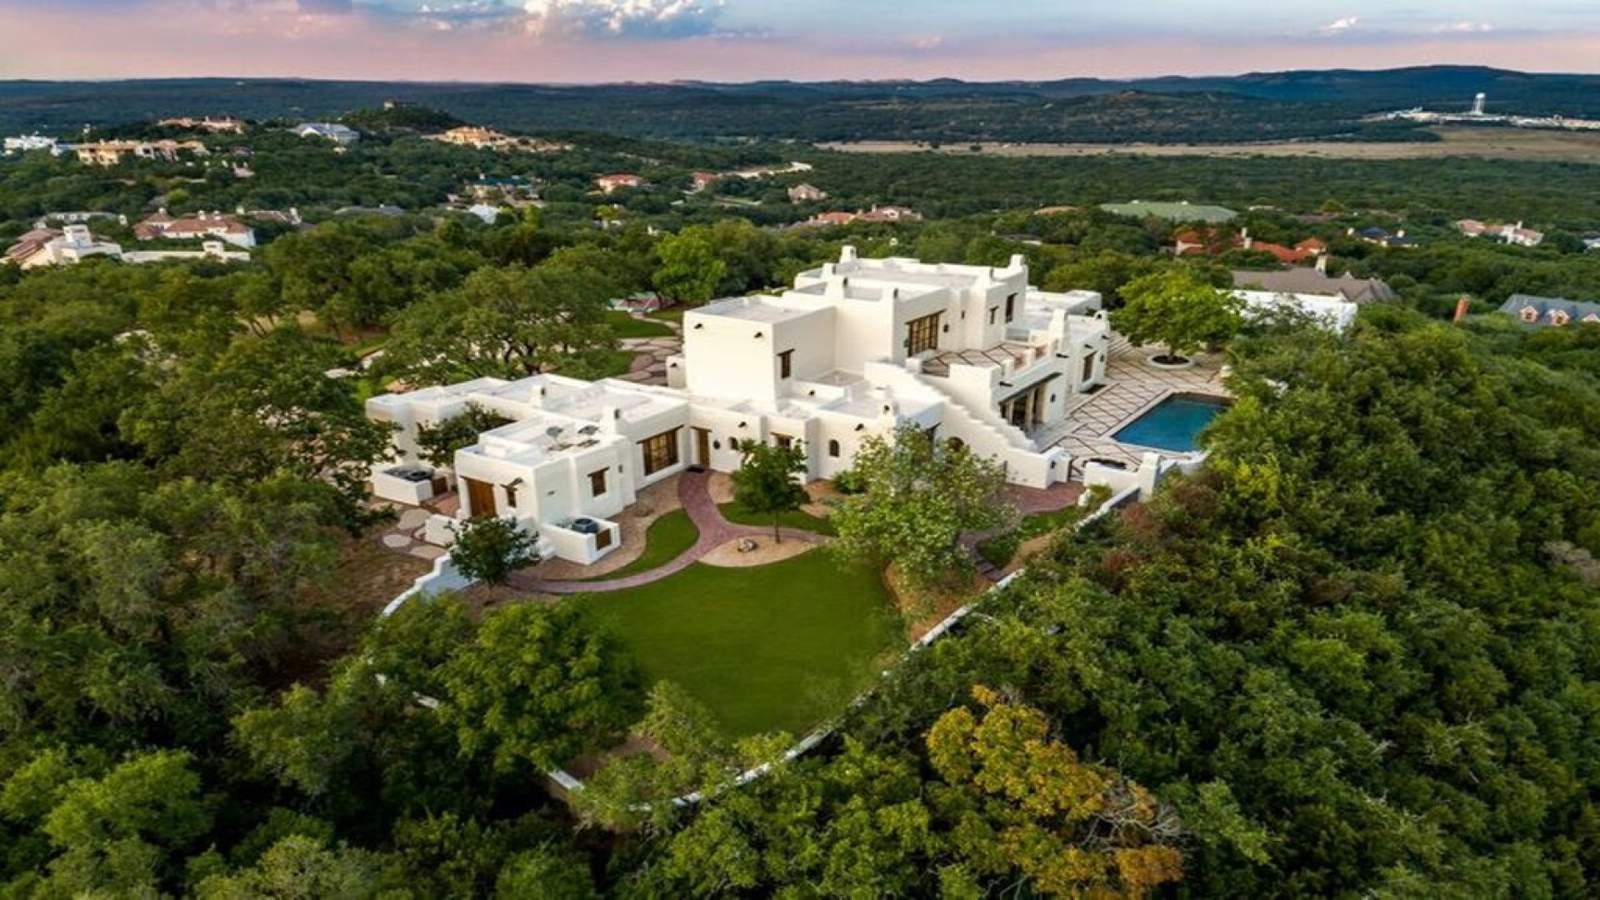 George Strait’s exclusive Dominion estate is still for sale, but at lower price